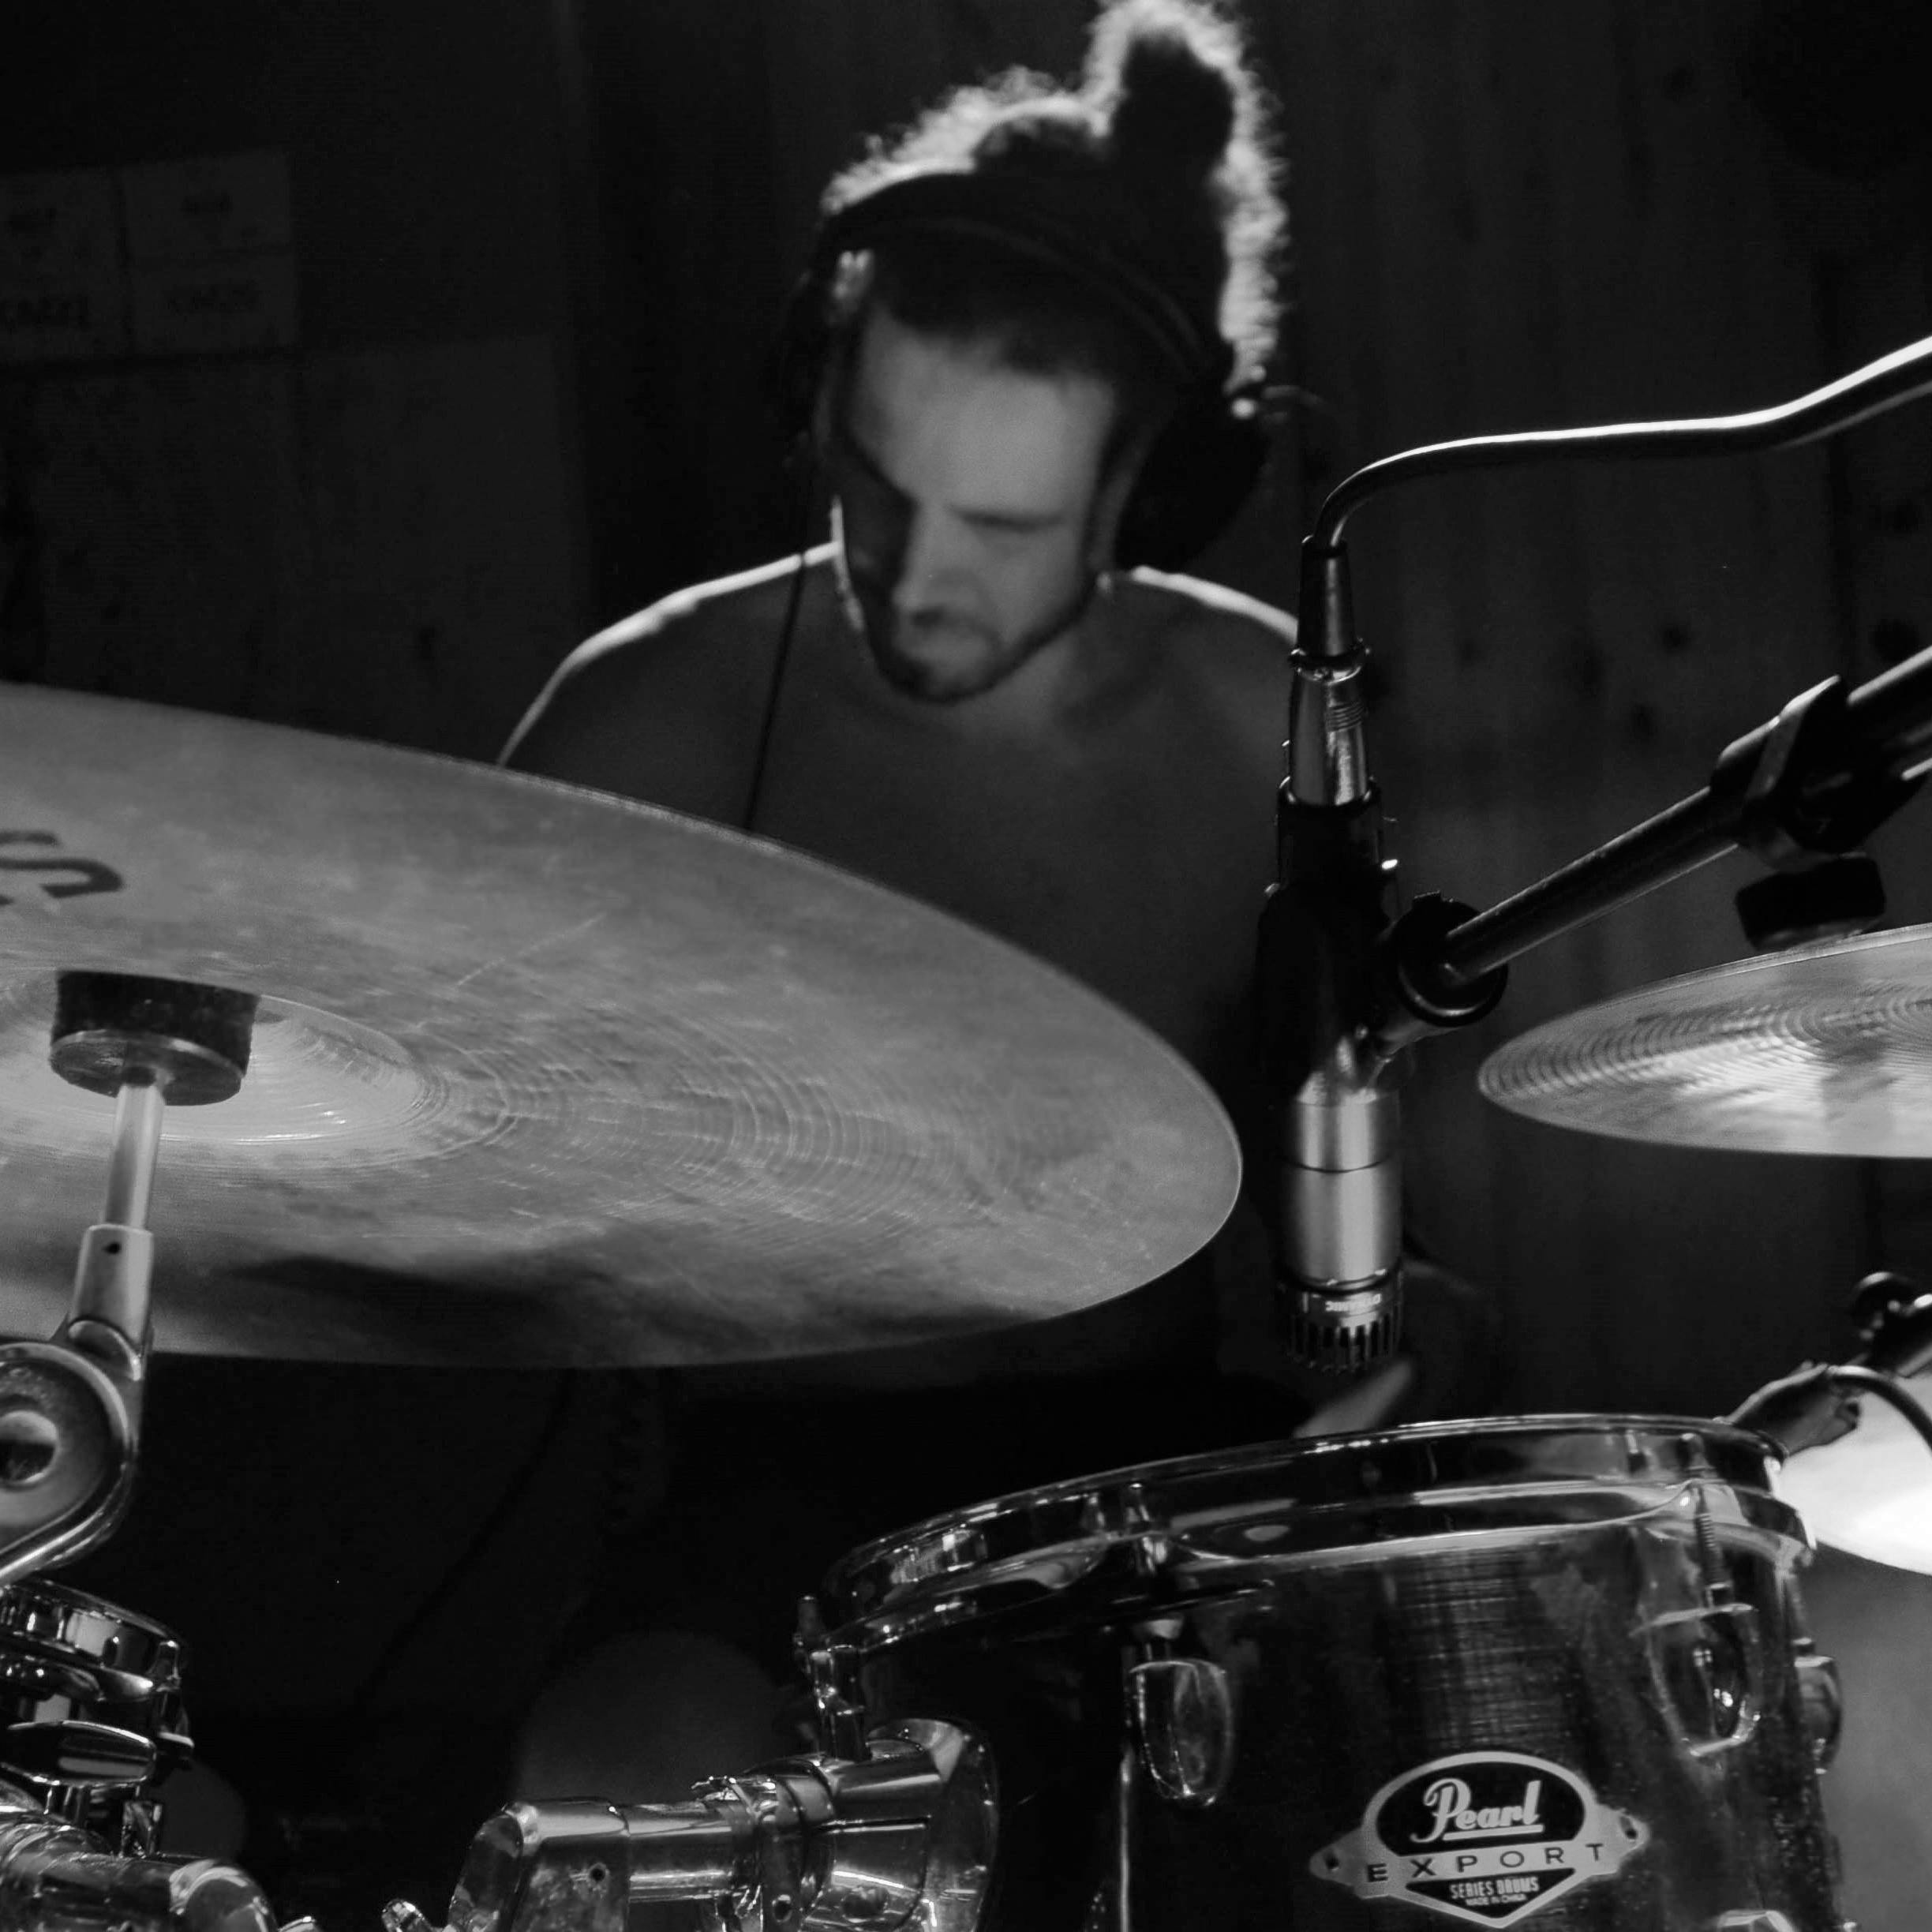 drum concentration BW.jpg